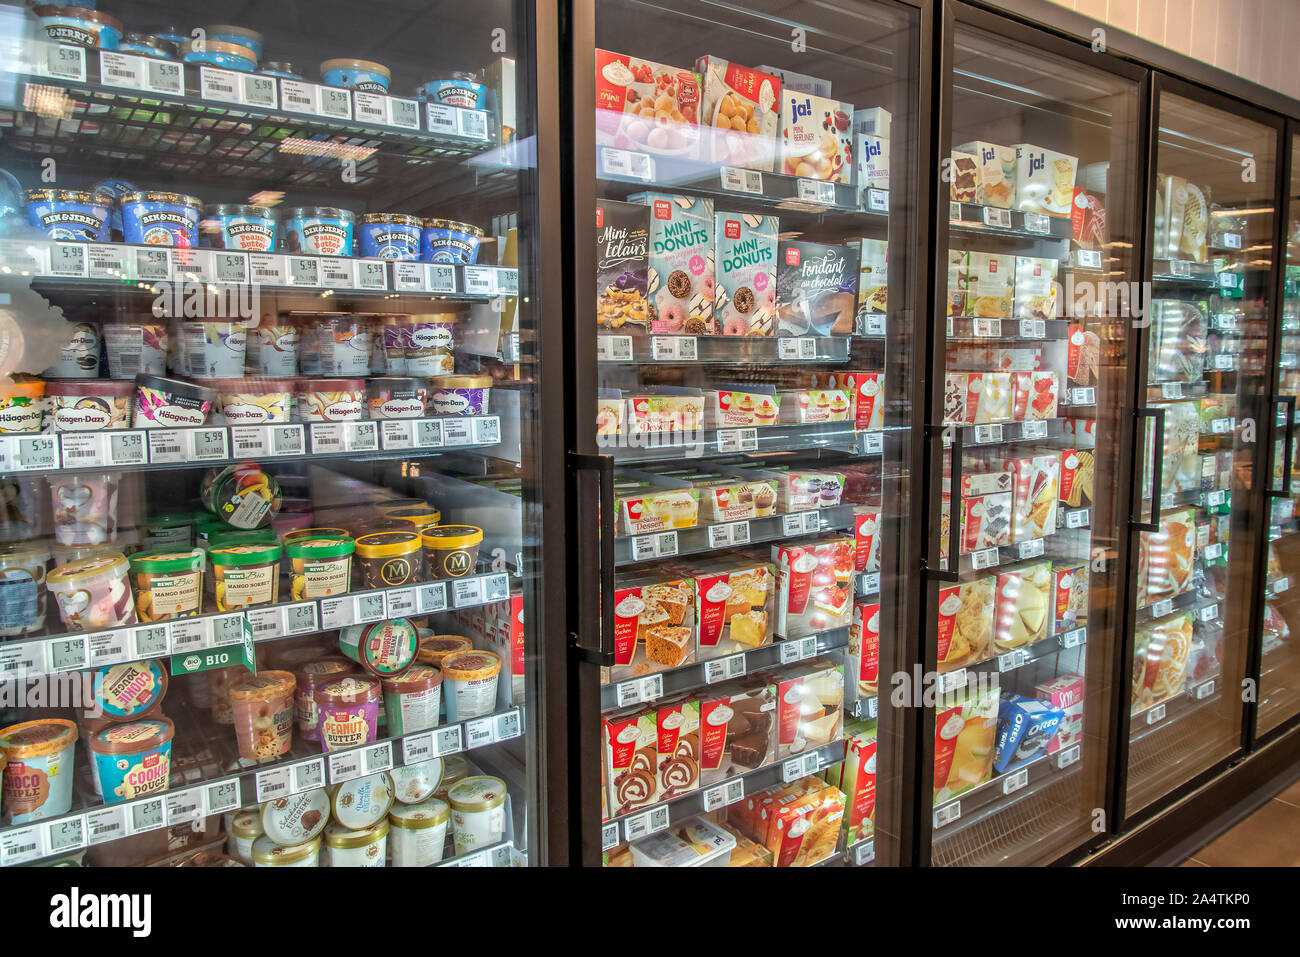 Modern refrigerated shelves with frozen goods in a supermarket Stock Photo